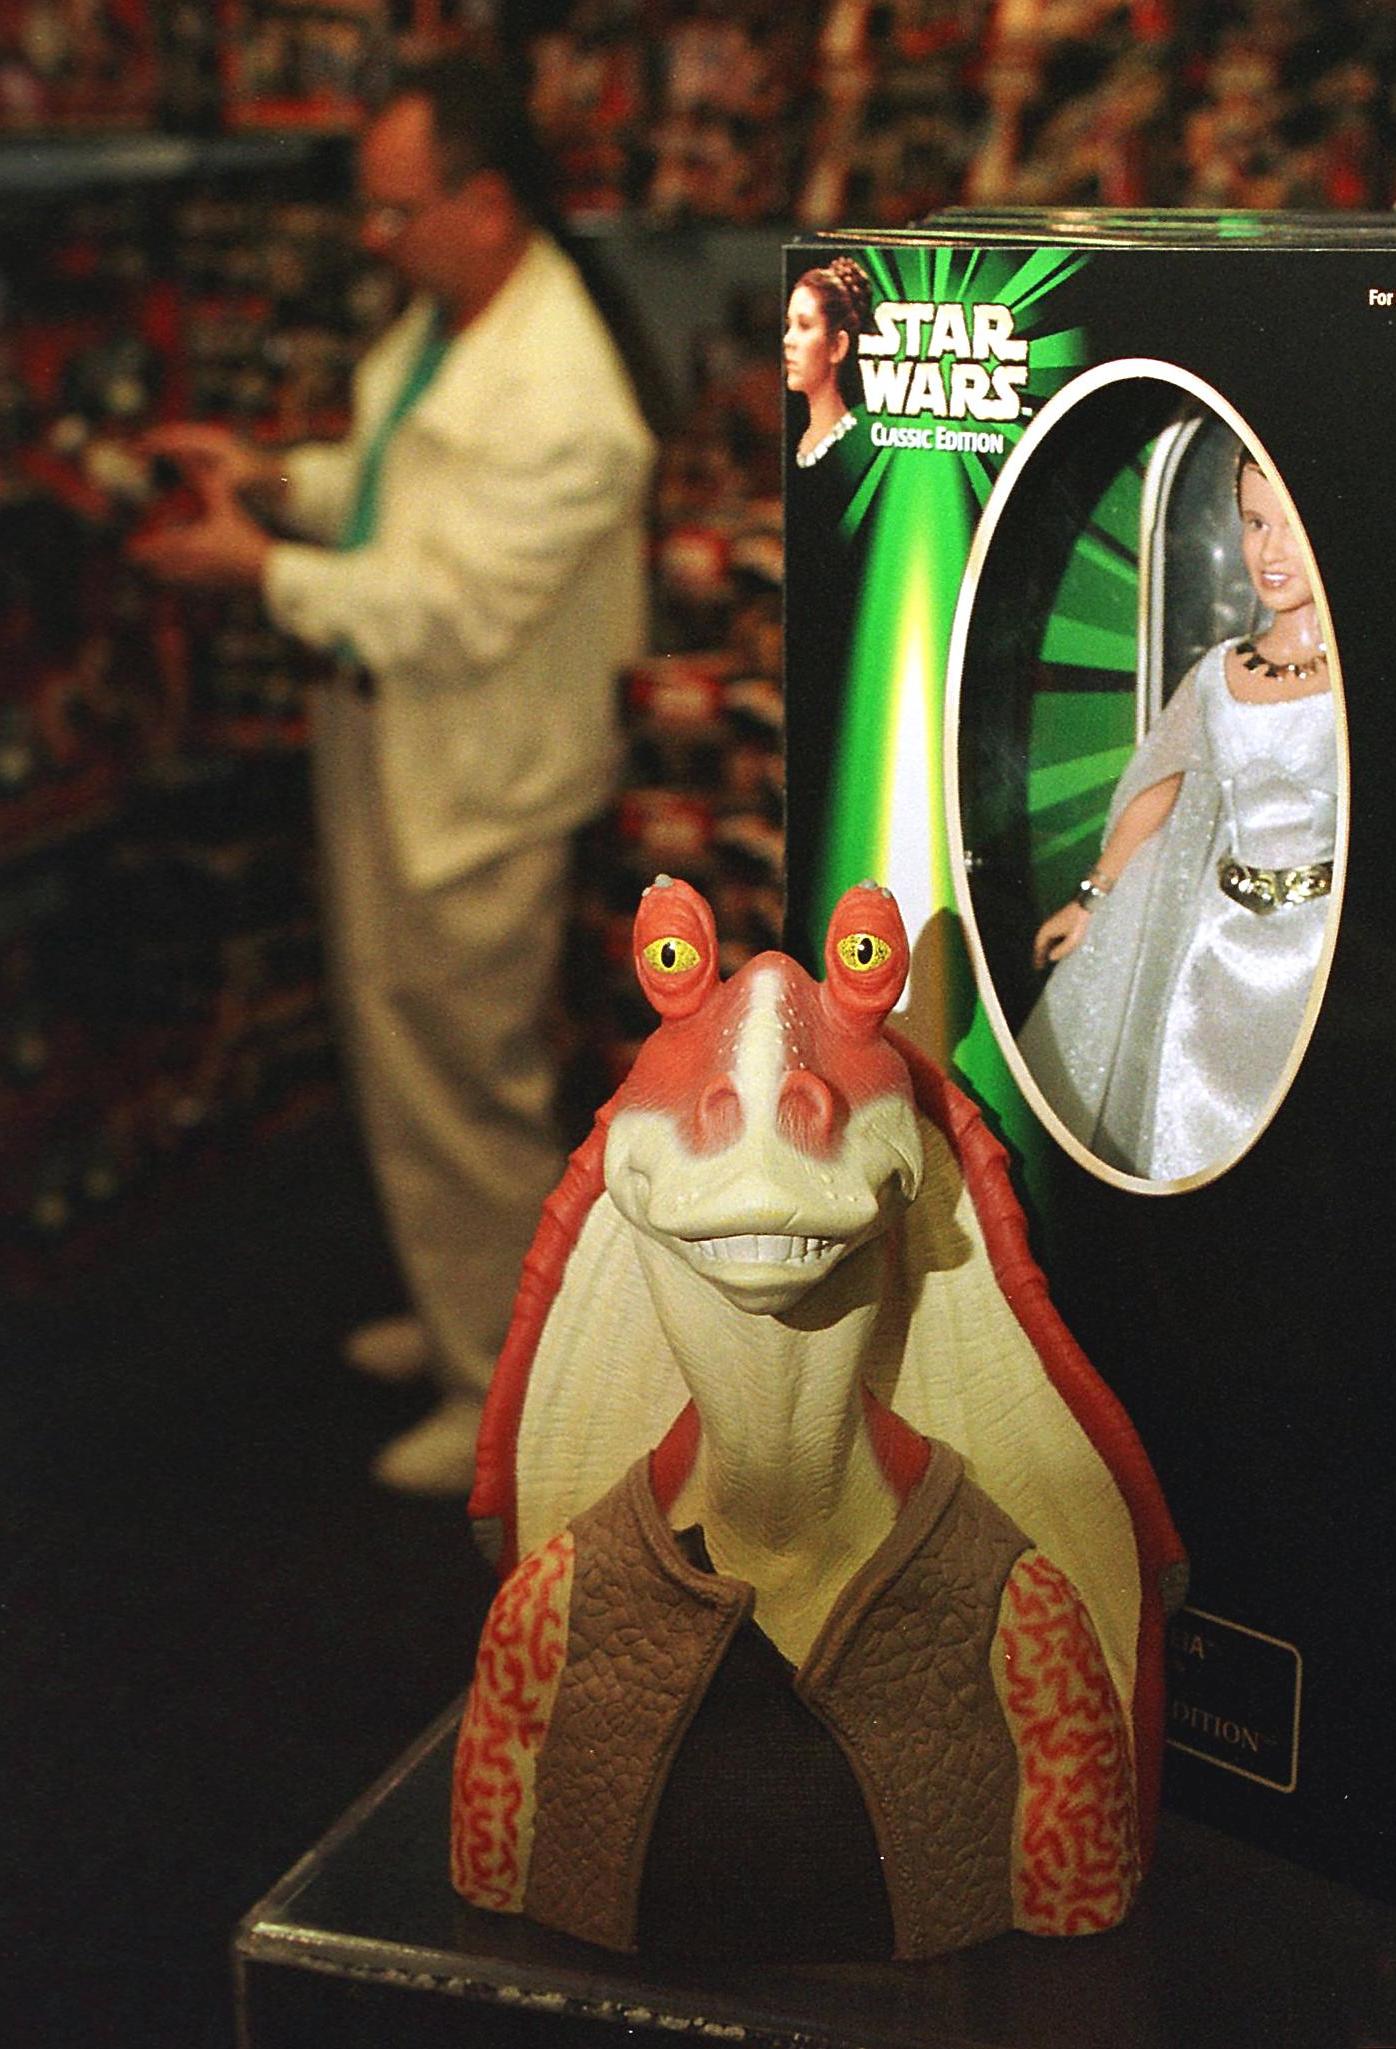 A figure of the character called Jar Jar Binks (C) from the Star Wars movie The Phantom Menace sits next to a figure of Princess Leia (R) from the original Star Wars trilogy in a display at FAO Schwartz 07 May 1999 in Garden City, NY. (MATT CAMPBELL—AFP/Getty Images)